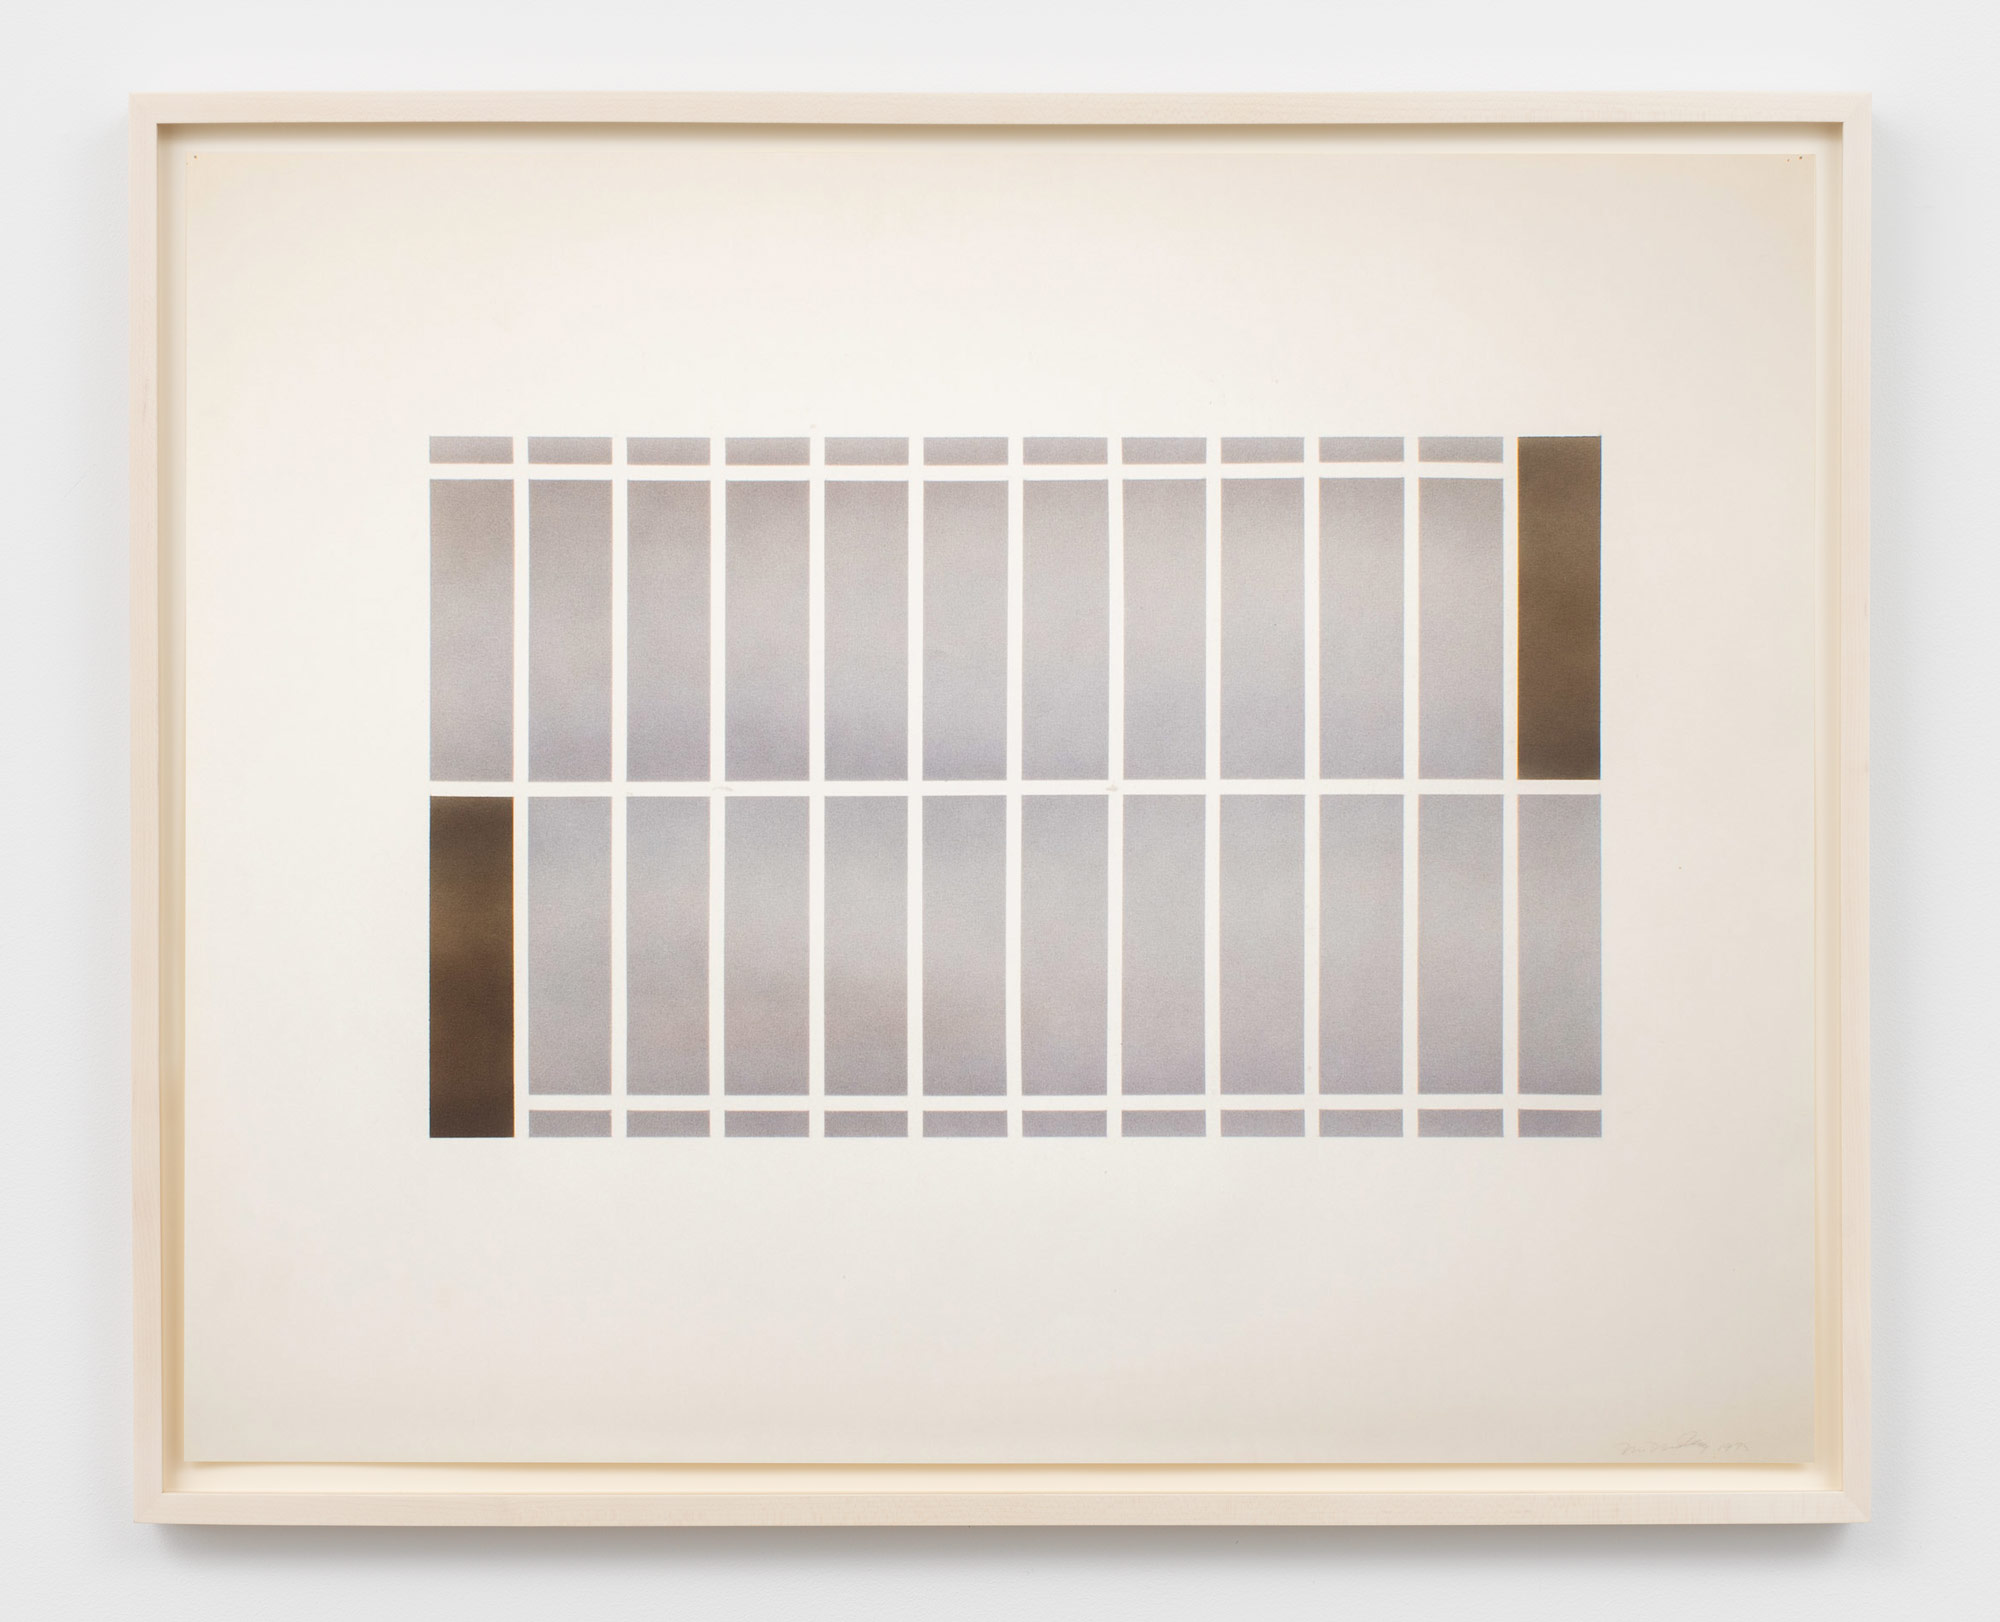 Don Dudley, Untitled, 1975, Airbrush ink on paper, 23 x 29 in.